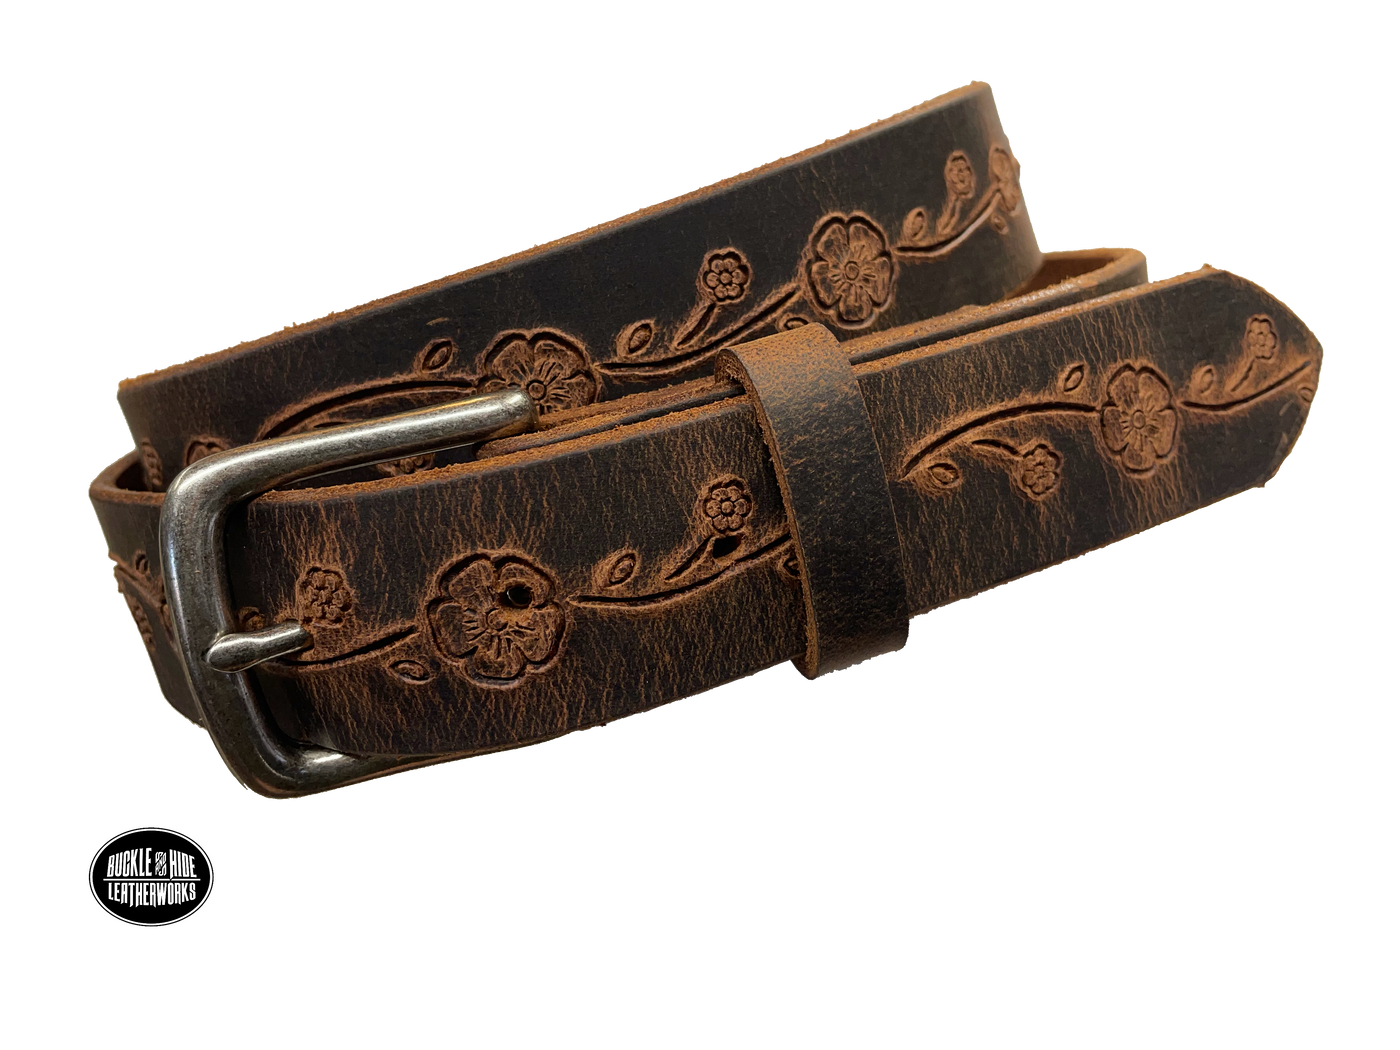 This brown leather belt is made from Crazy Horse tanned leather for that distressed and pull-up look. The edges are beveled and left raw for a contrasting look. It has an antique nickel coated solid brass buckle that is snapped in place. Belt is 1 1/4" wide and available in lengths from 34" to 44".  It is handmade in our shop in Smyrna, TN, just outside of Nashville.